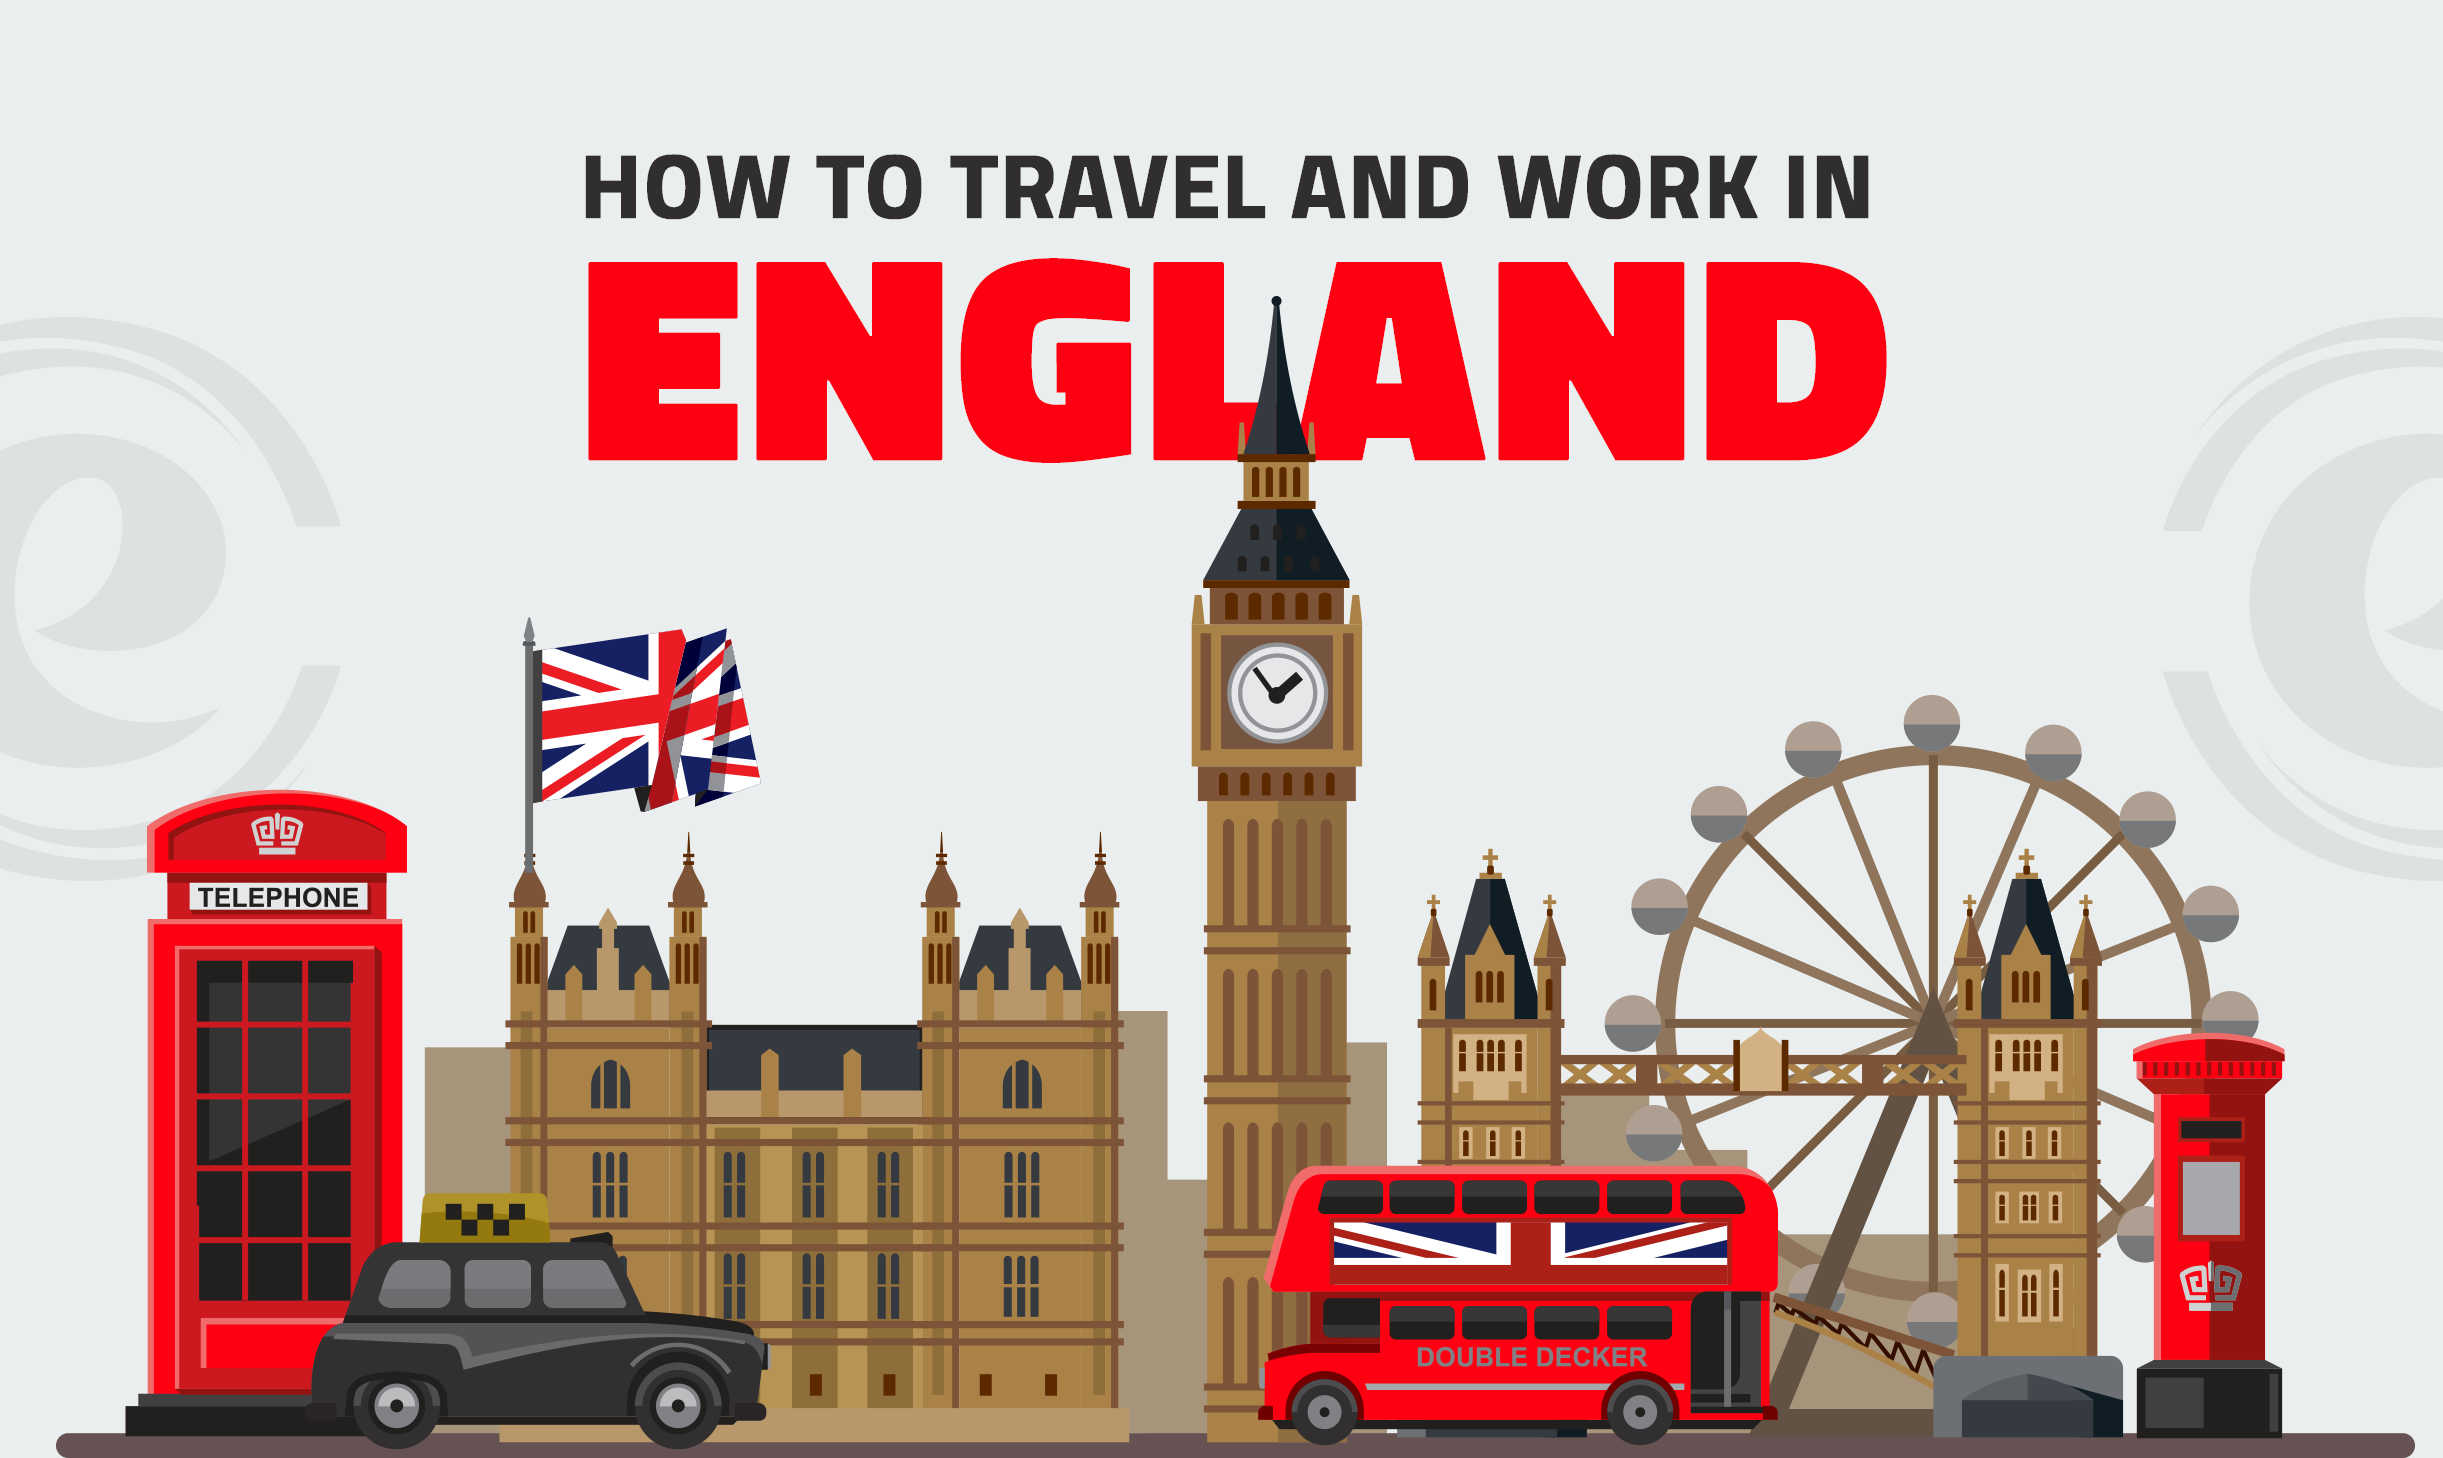 How to travel and work in England